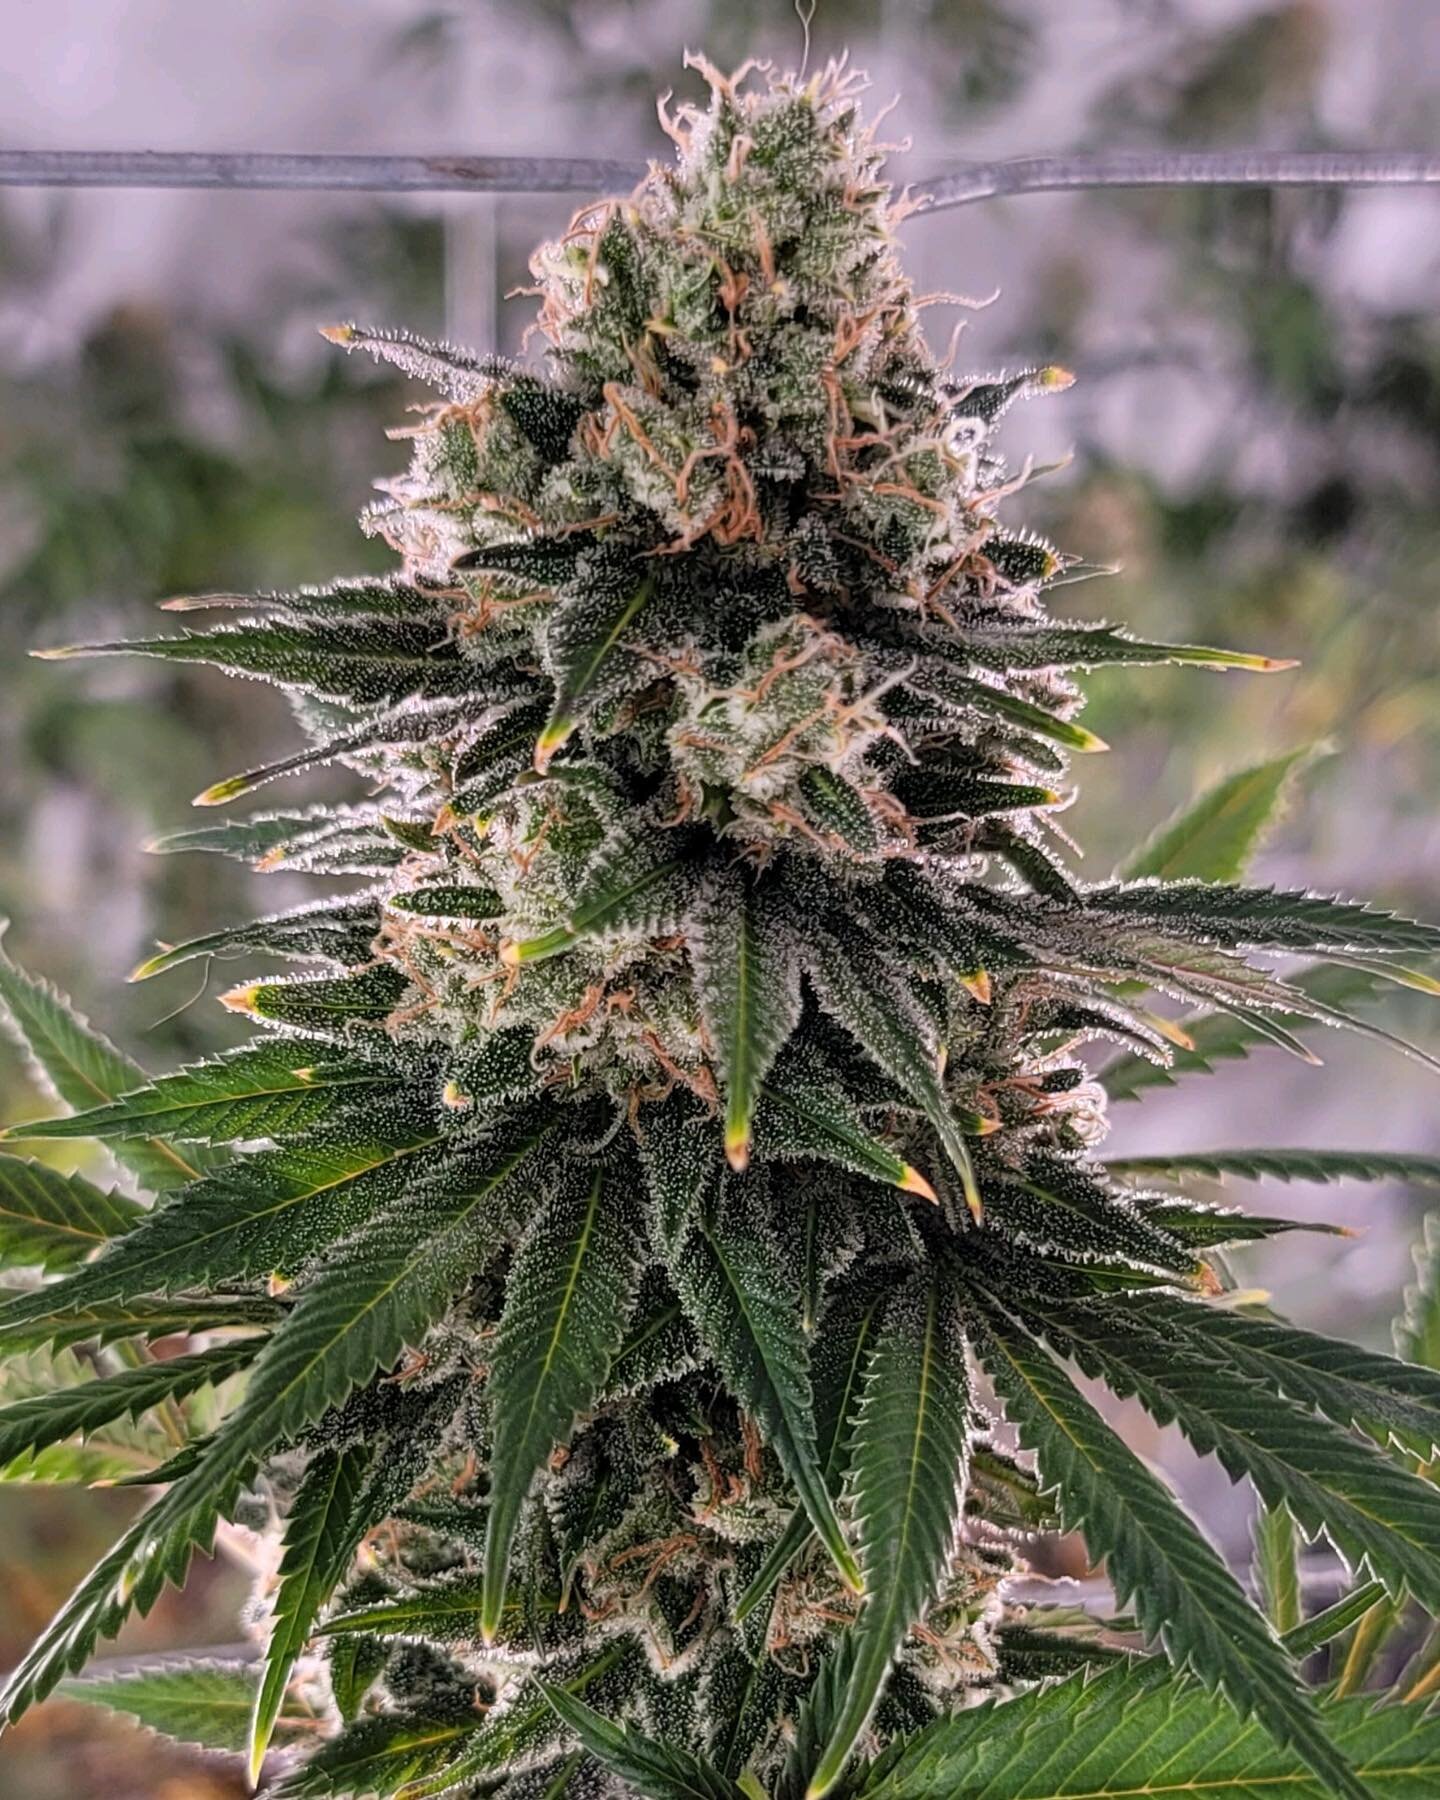 Been a minute since our last post. Been busy working!  We're getting ready to harvest this latest batch. Buds looking great. Still didnt get the plant size right for the vertical set up. Still learning! Heres one of our strains:  Applehead. Aka Beef.